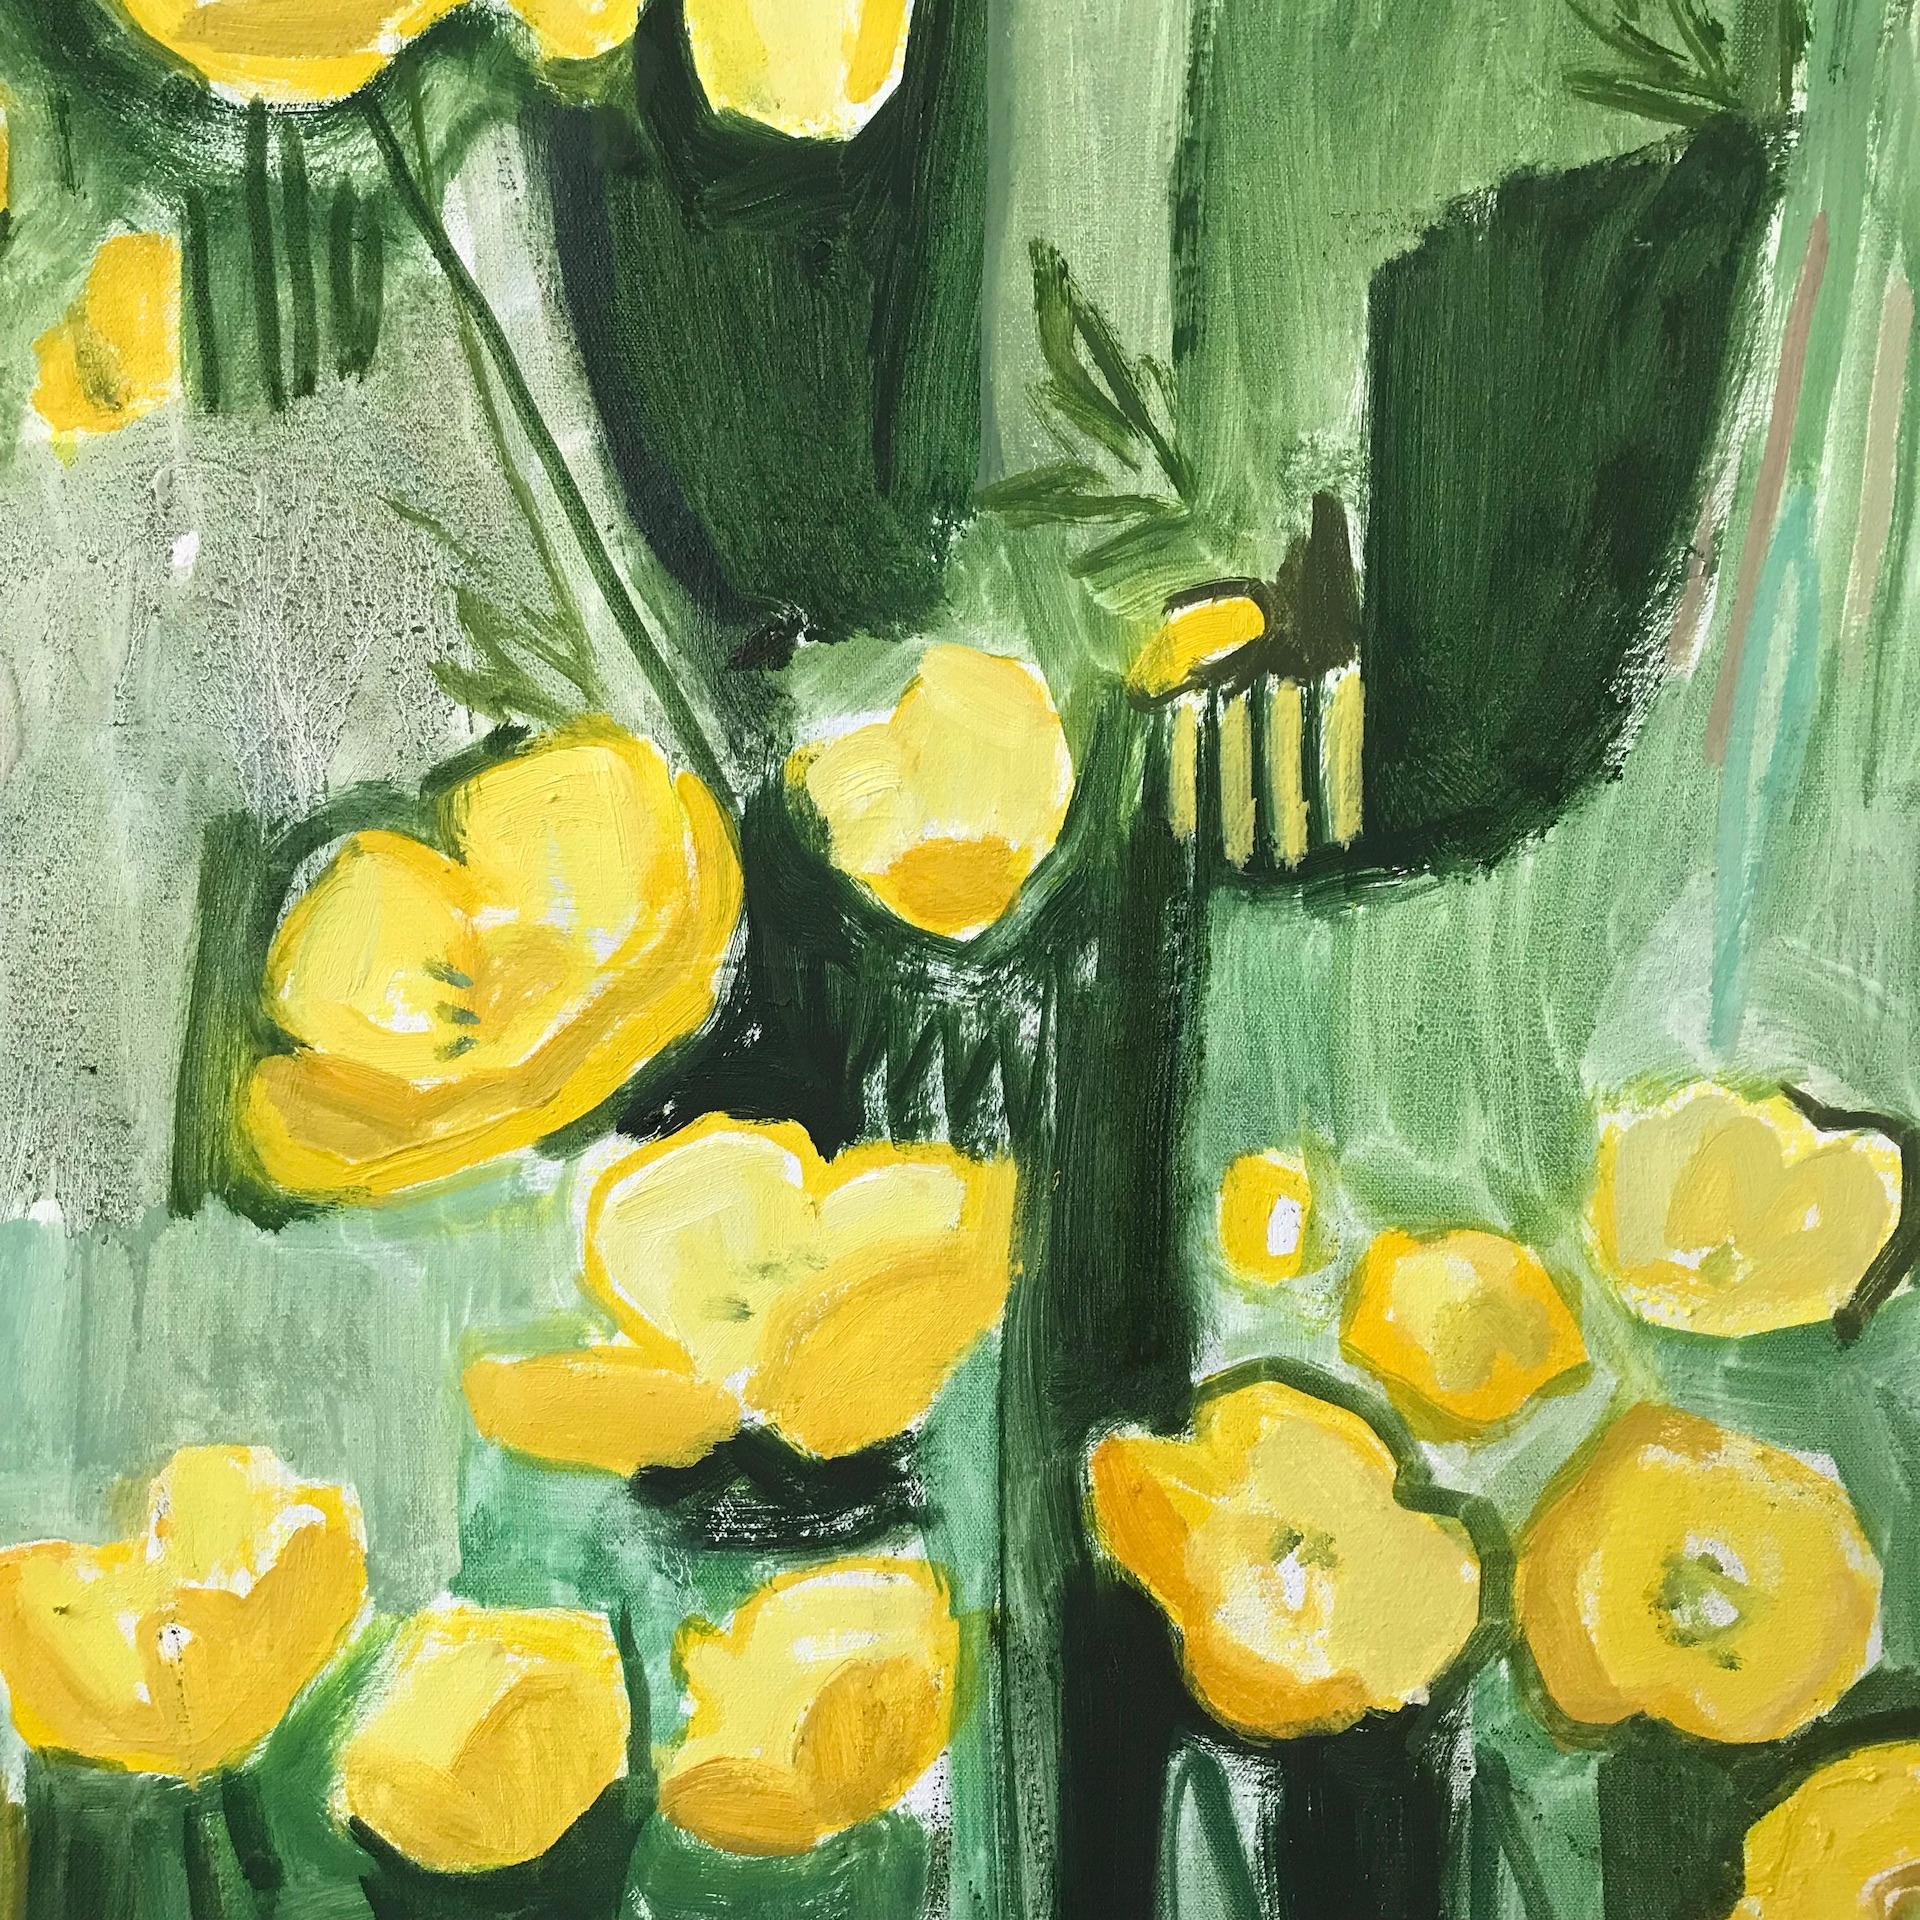 Just Buttercups [2022]
original and hand signed by the artist 
oil on canvas
Image size: H:120 cm x W:120 cm
Complete Size of Unframed Work: H:120 cm x W:120 cm x D:4.5cm
Sold Unframed
Please note that insitu images are purely an indication of how a